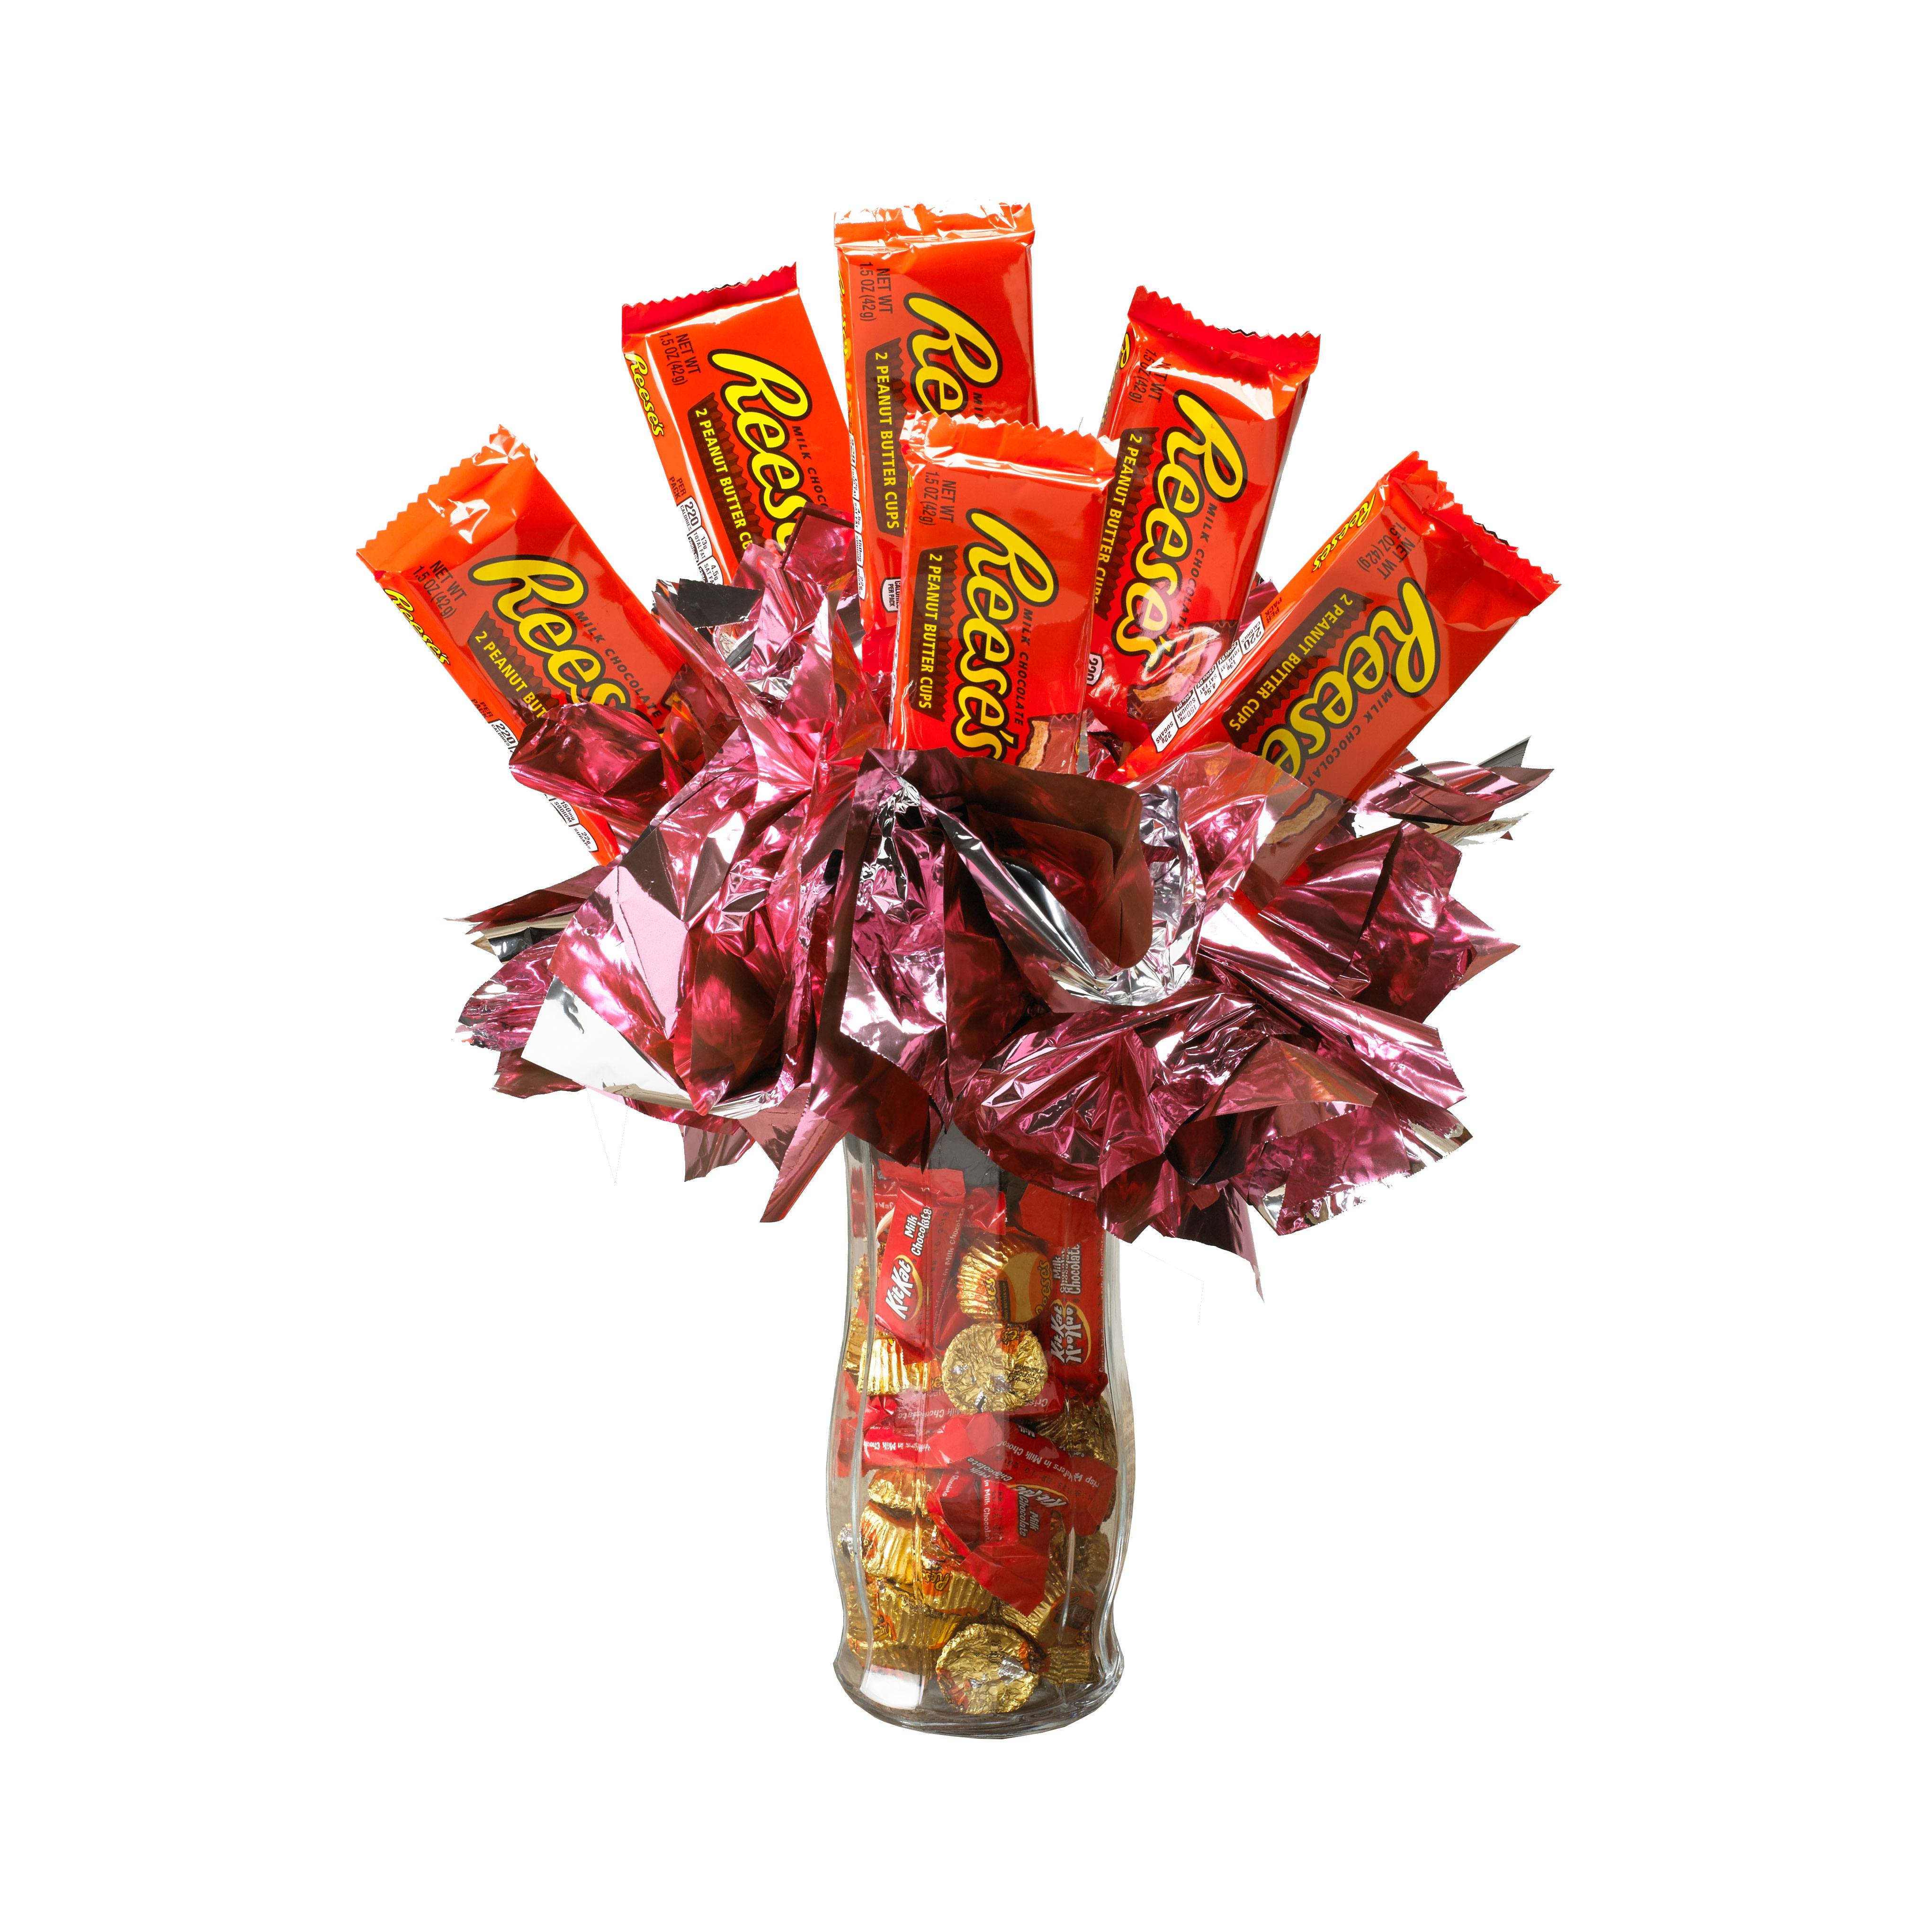 Everything for your Valentine! - Reasor's Foods